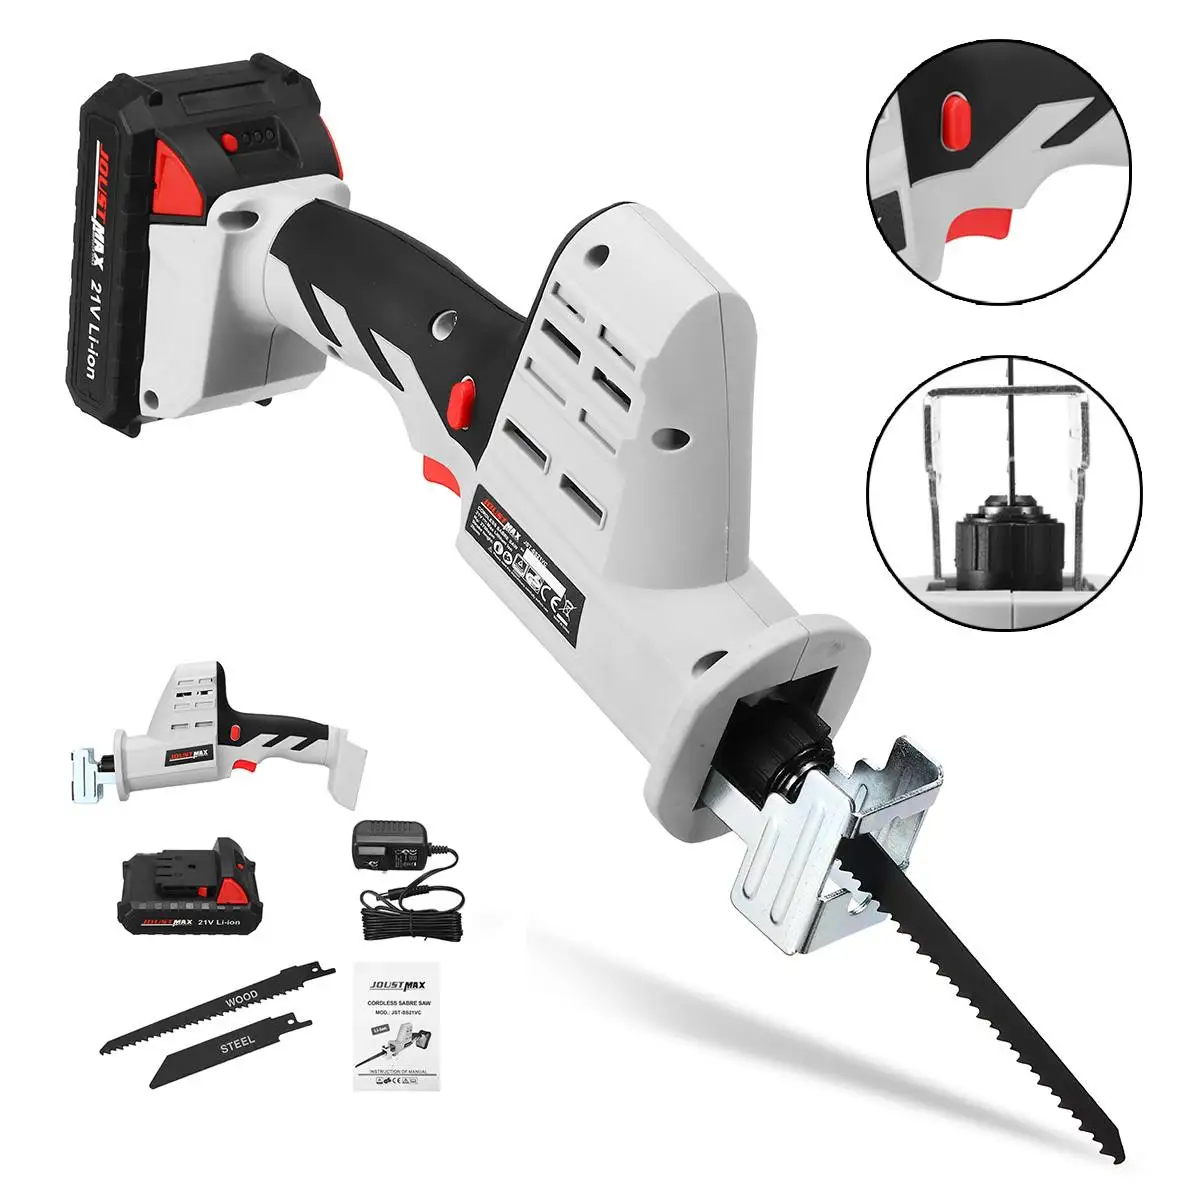 21V Wood Angle Cutting Cordless Reciprocating Saw Kit Portable Electric Saw Blades Metal  Woodworking Tool with Li-Ion Battery